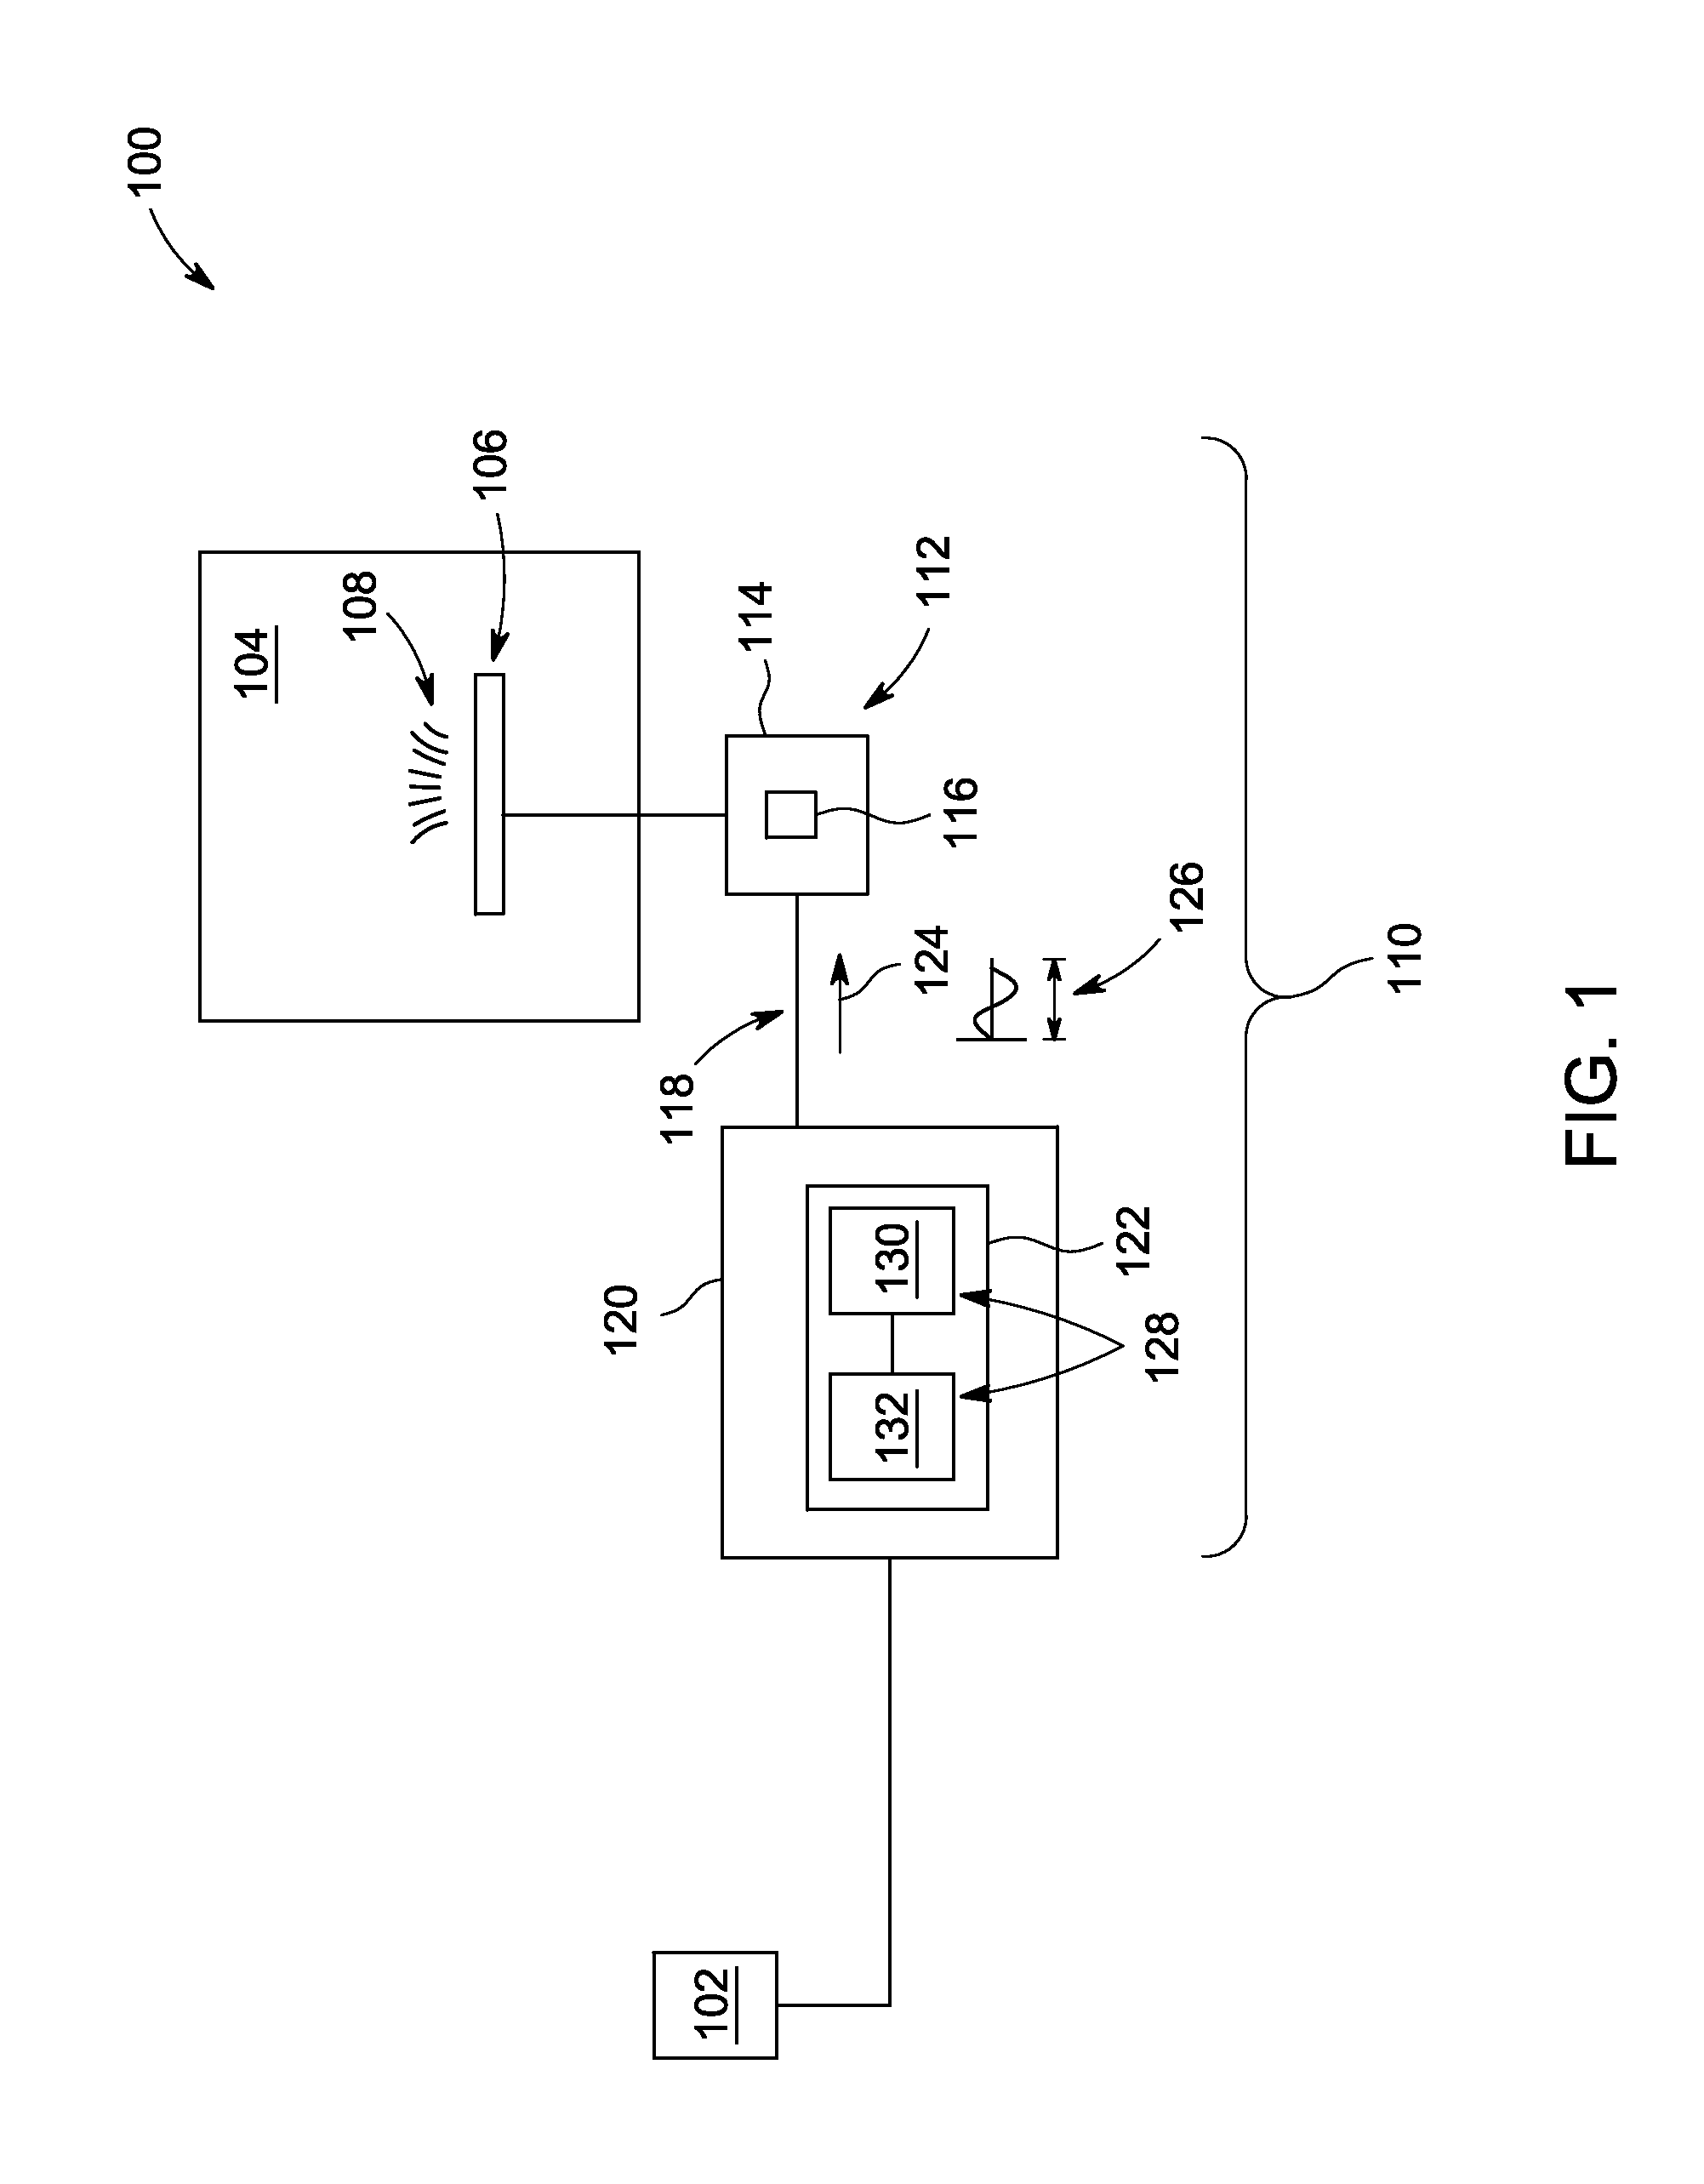 Appliance device with motors responsive to single-phase alternating current input